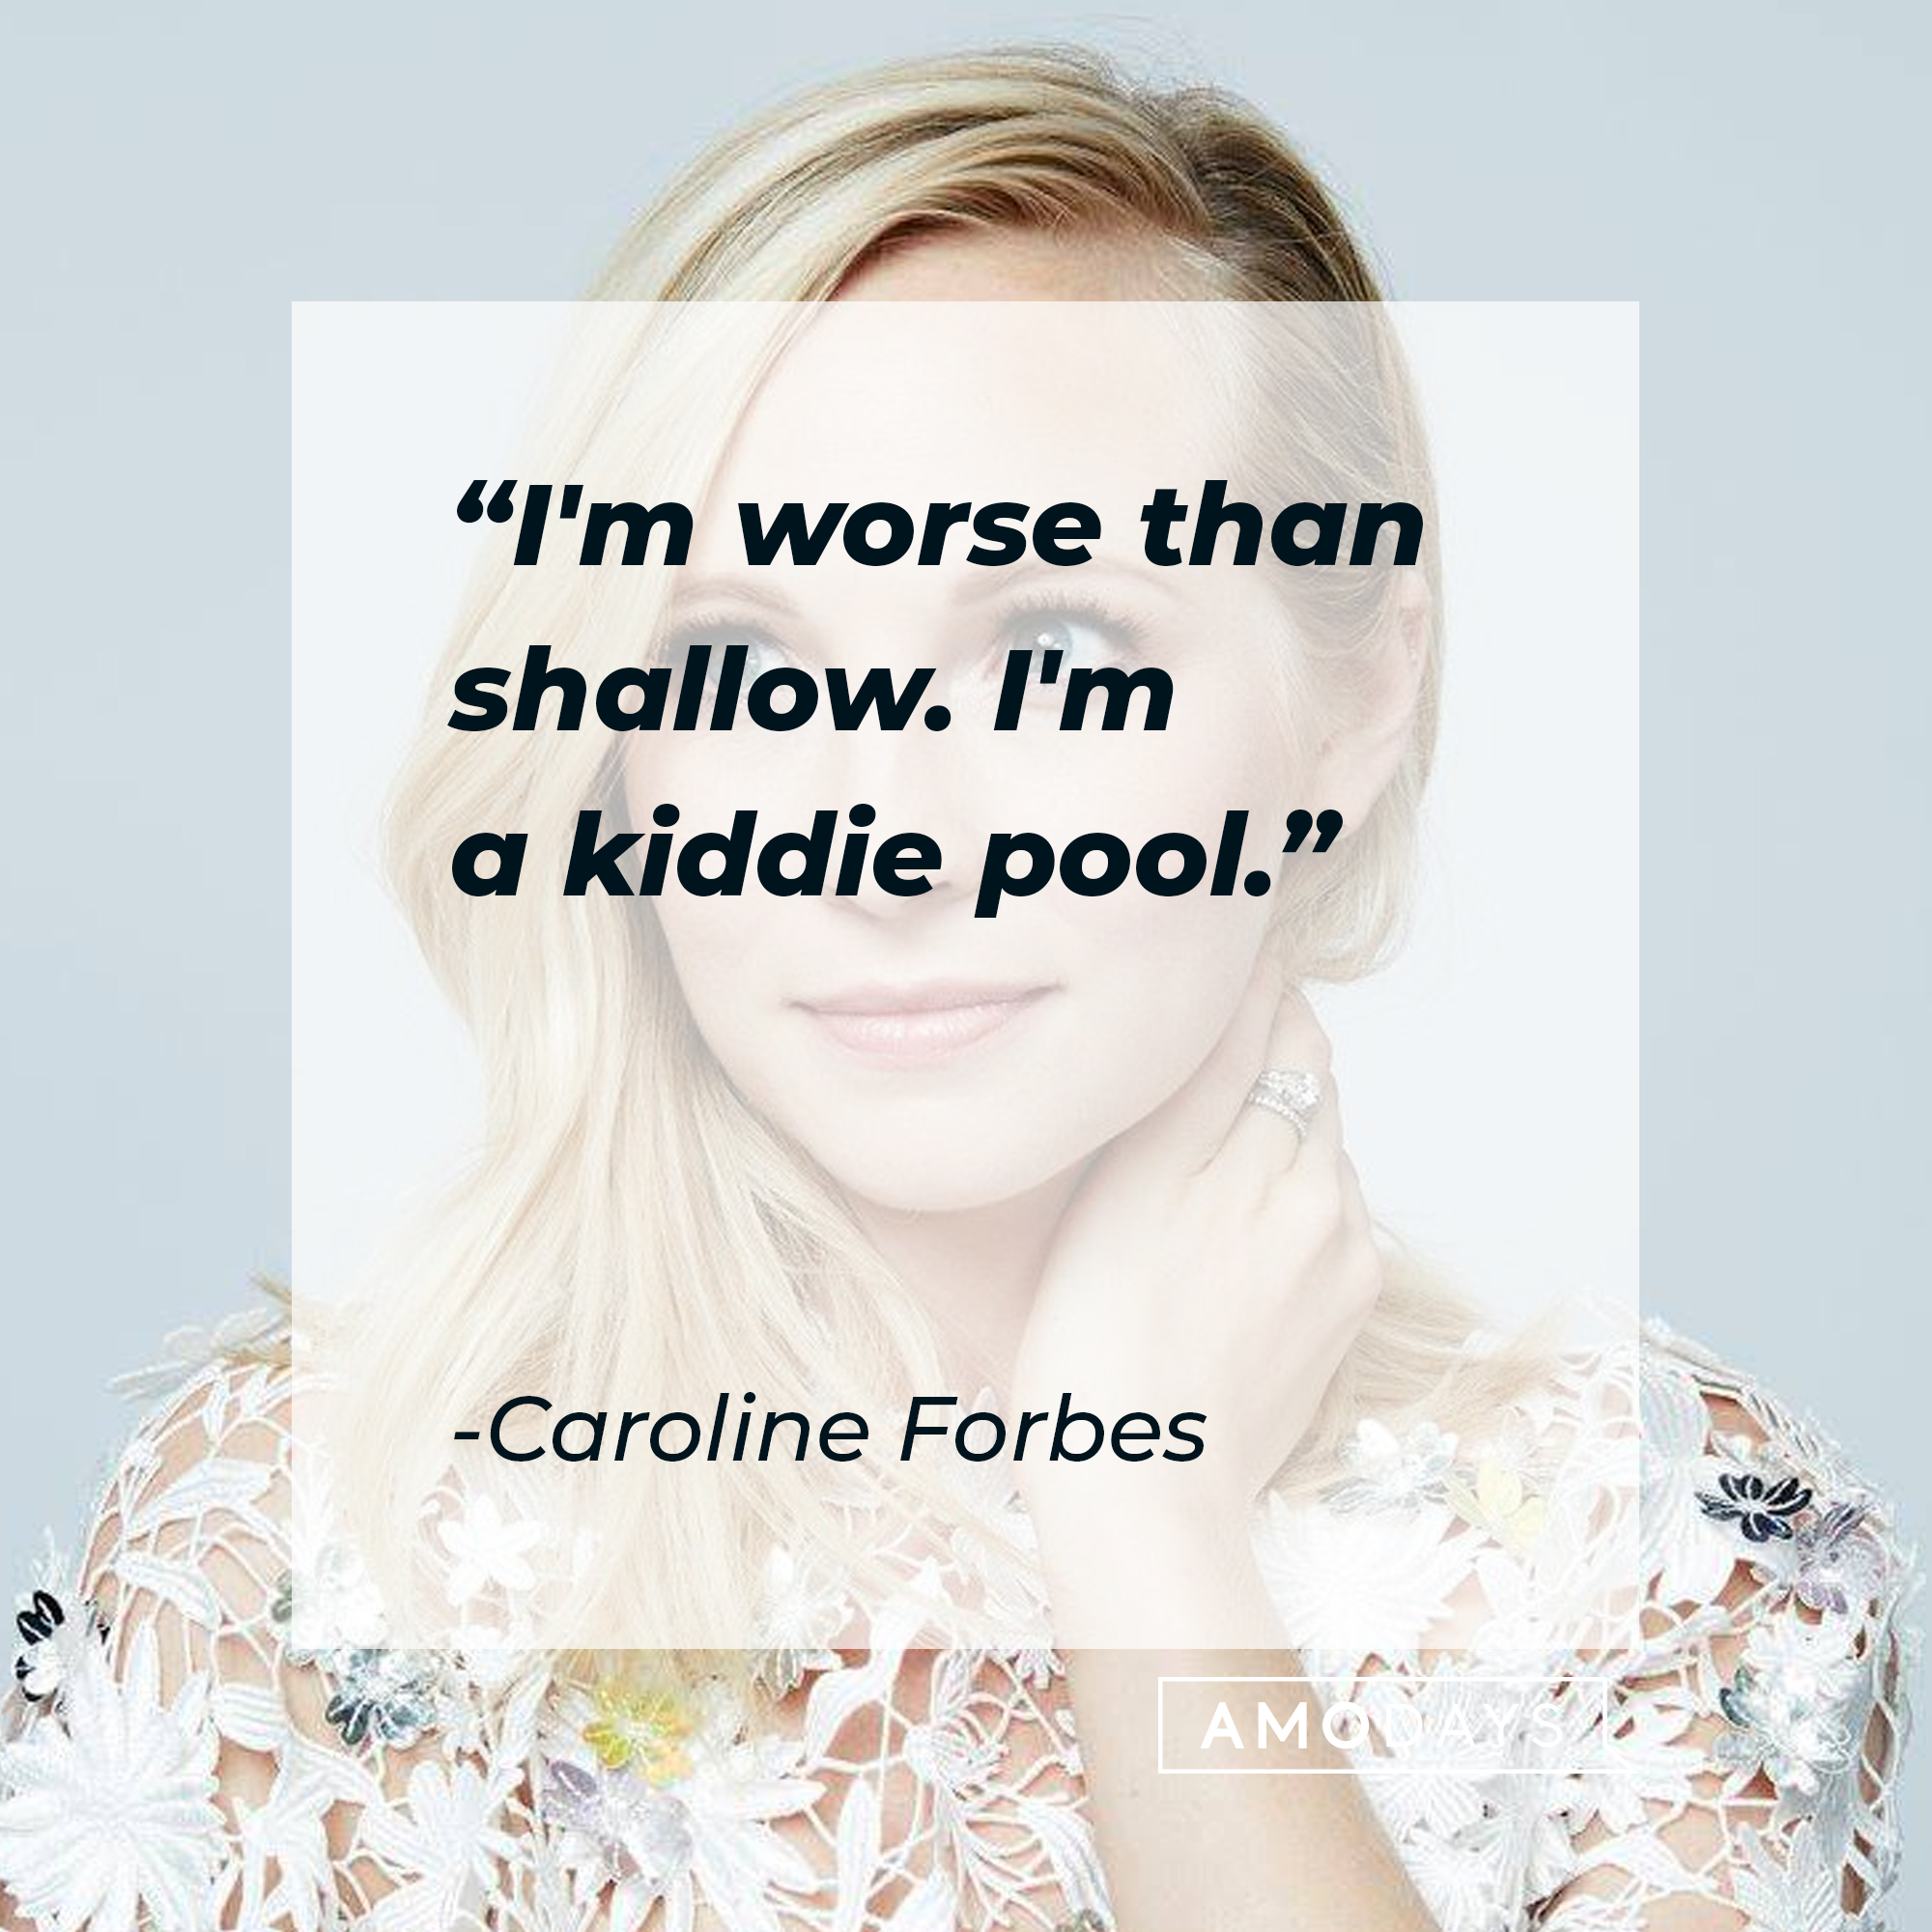 Caroline Forbes' quote: "I'm worse than shallow. I'm a kiddie pool." | Source: Facebook.com/thevampirediaries